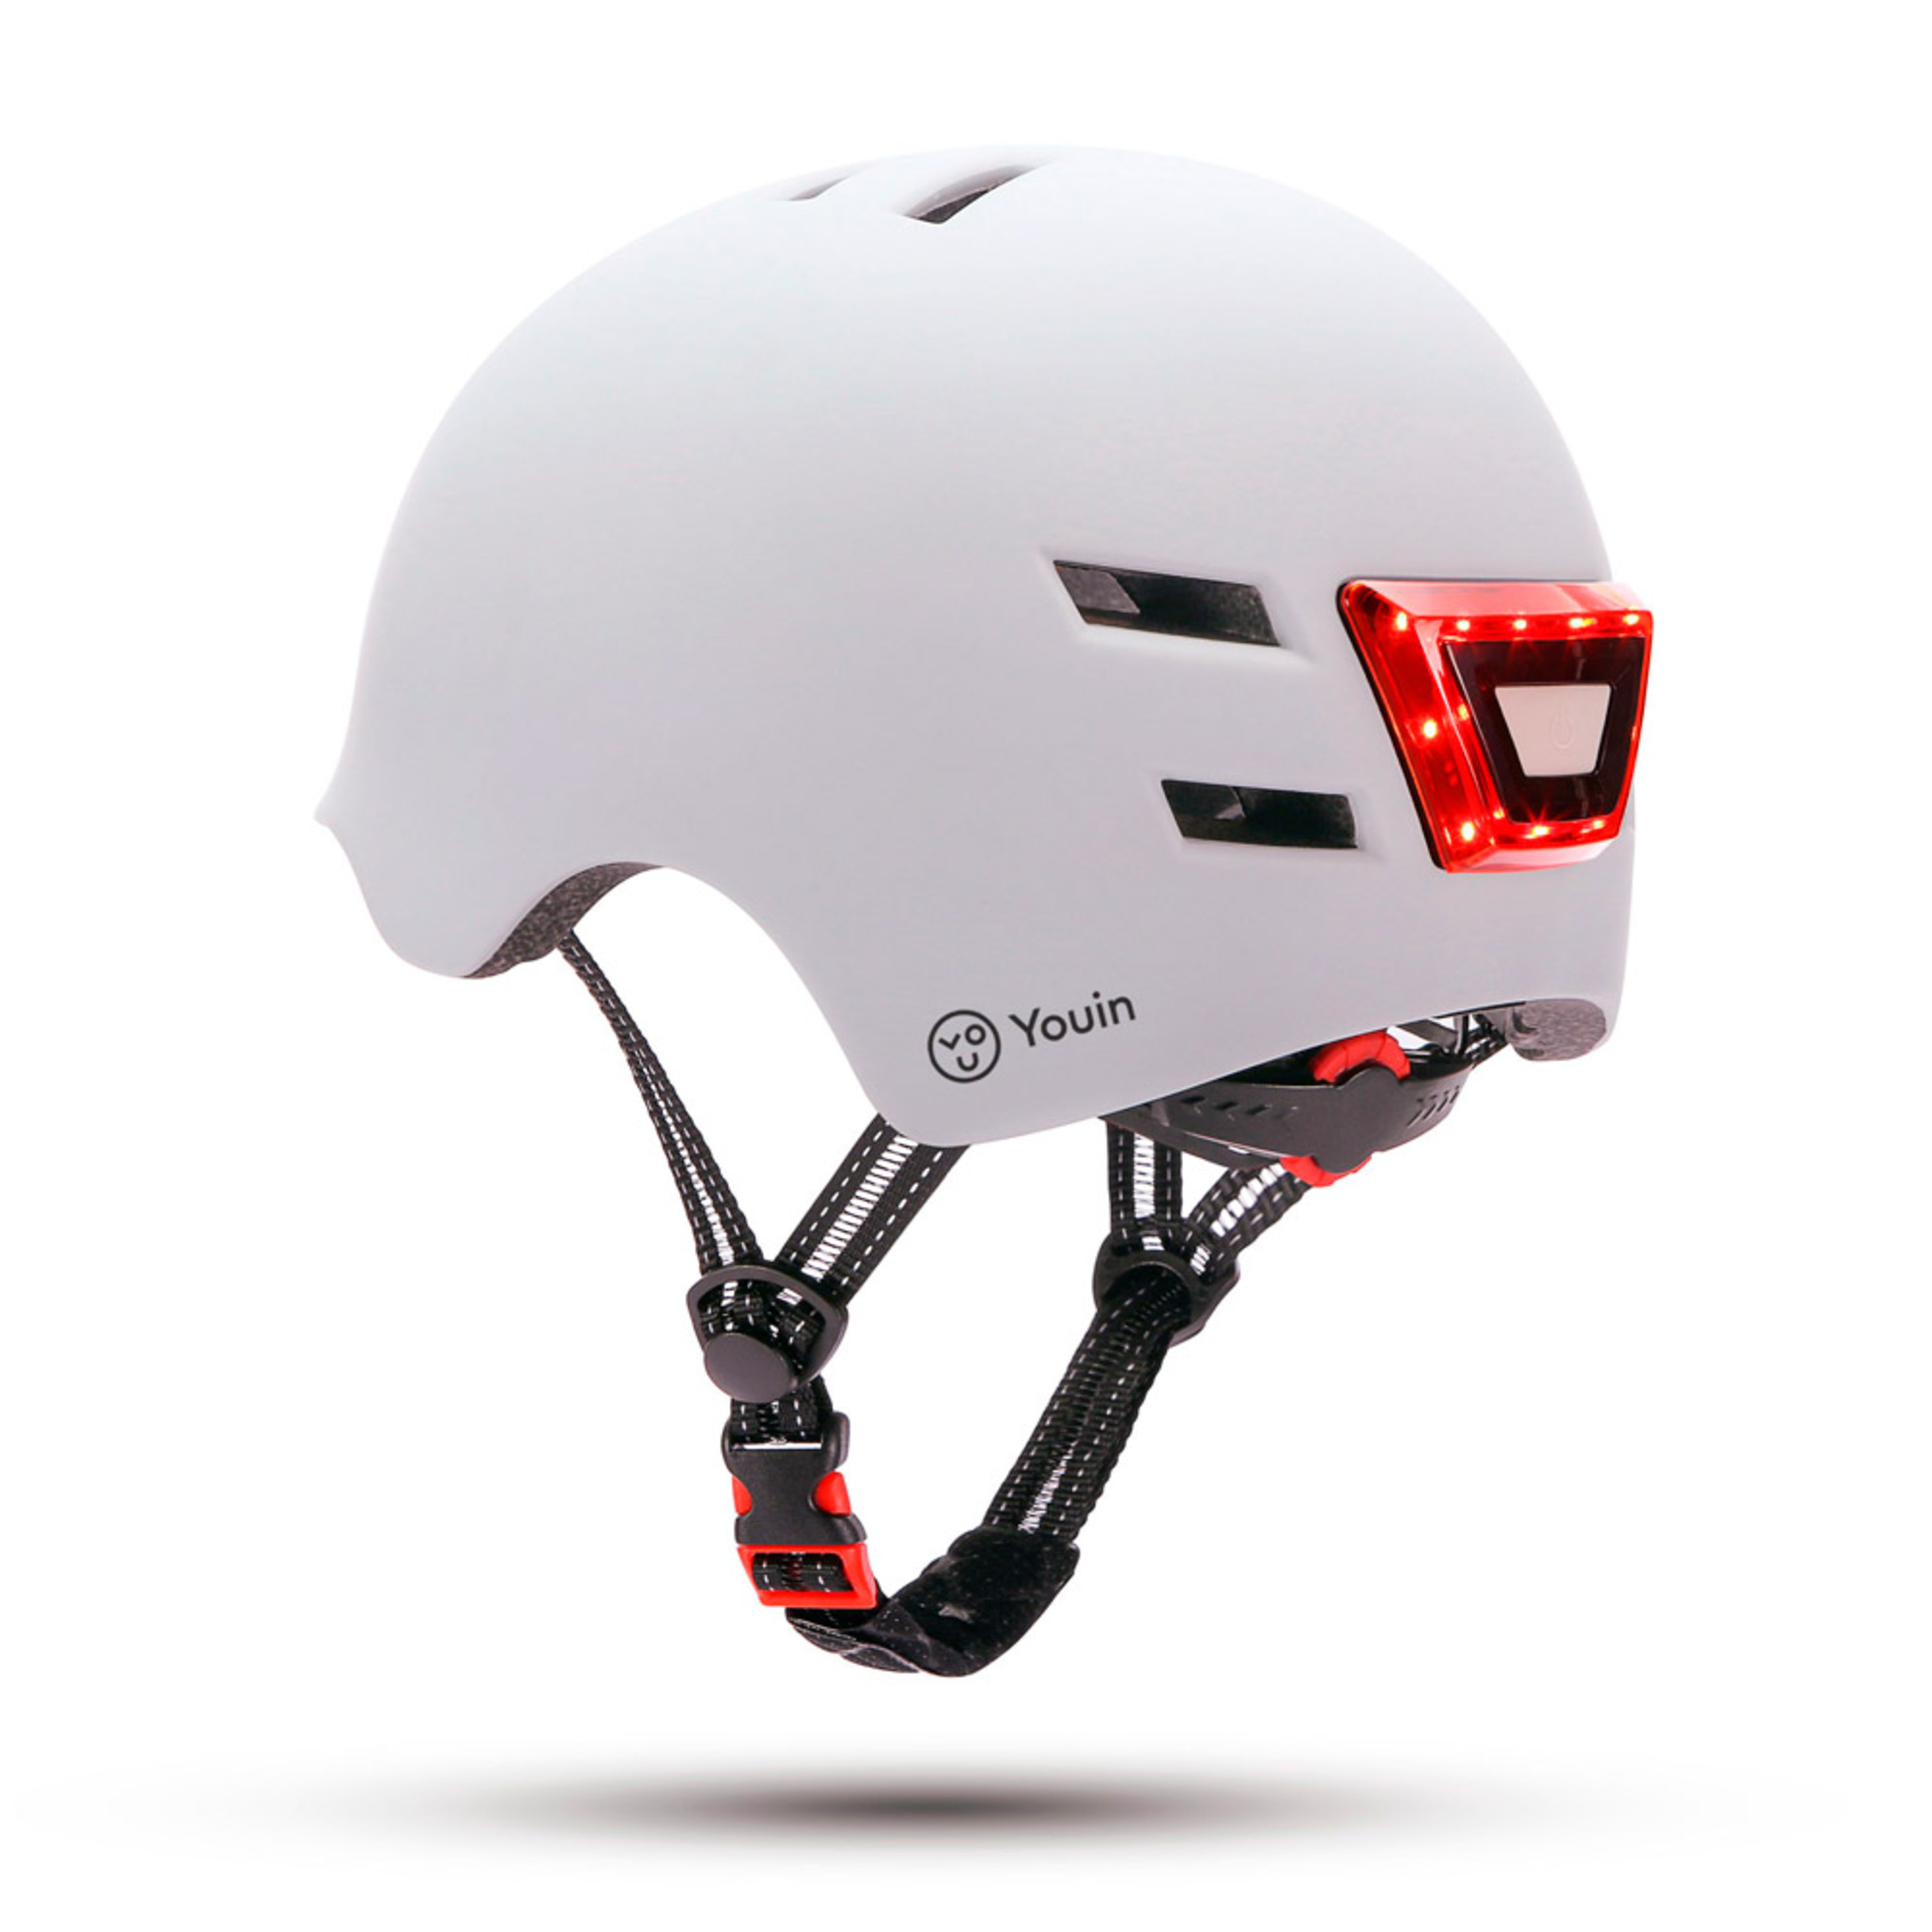 Casco Youin Con Luces Led Frontal Y Trasera Ajustable - blanco - 